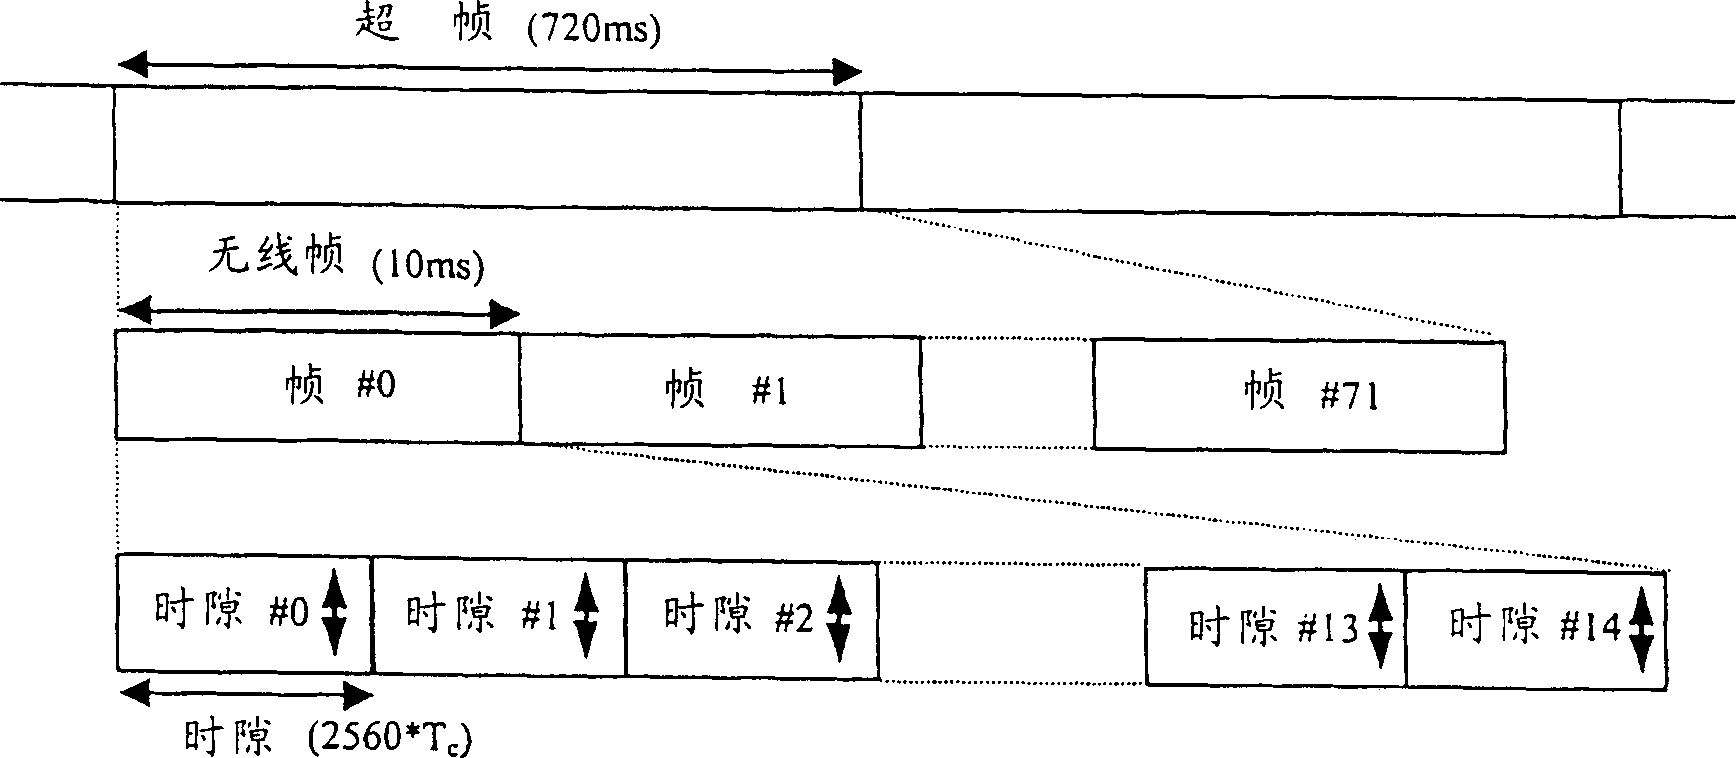 TDD framing method for physical layer of wireless system